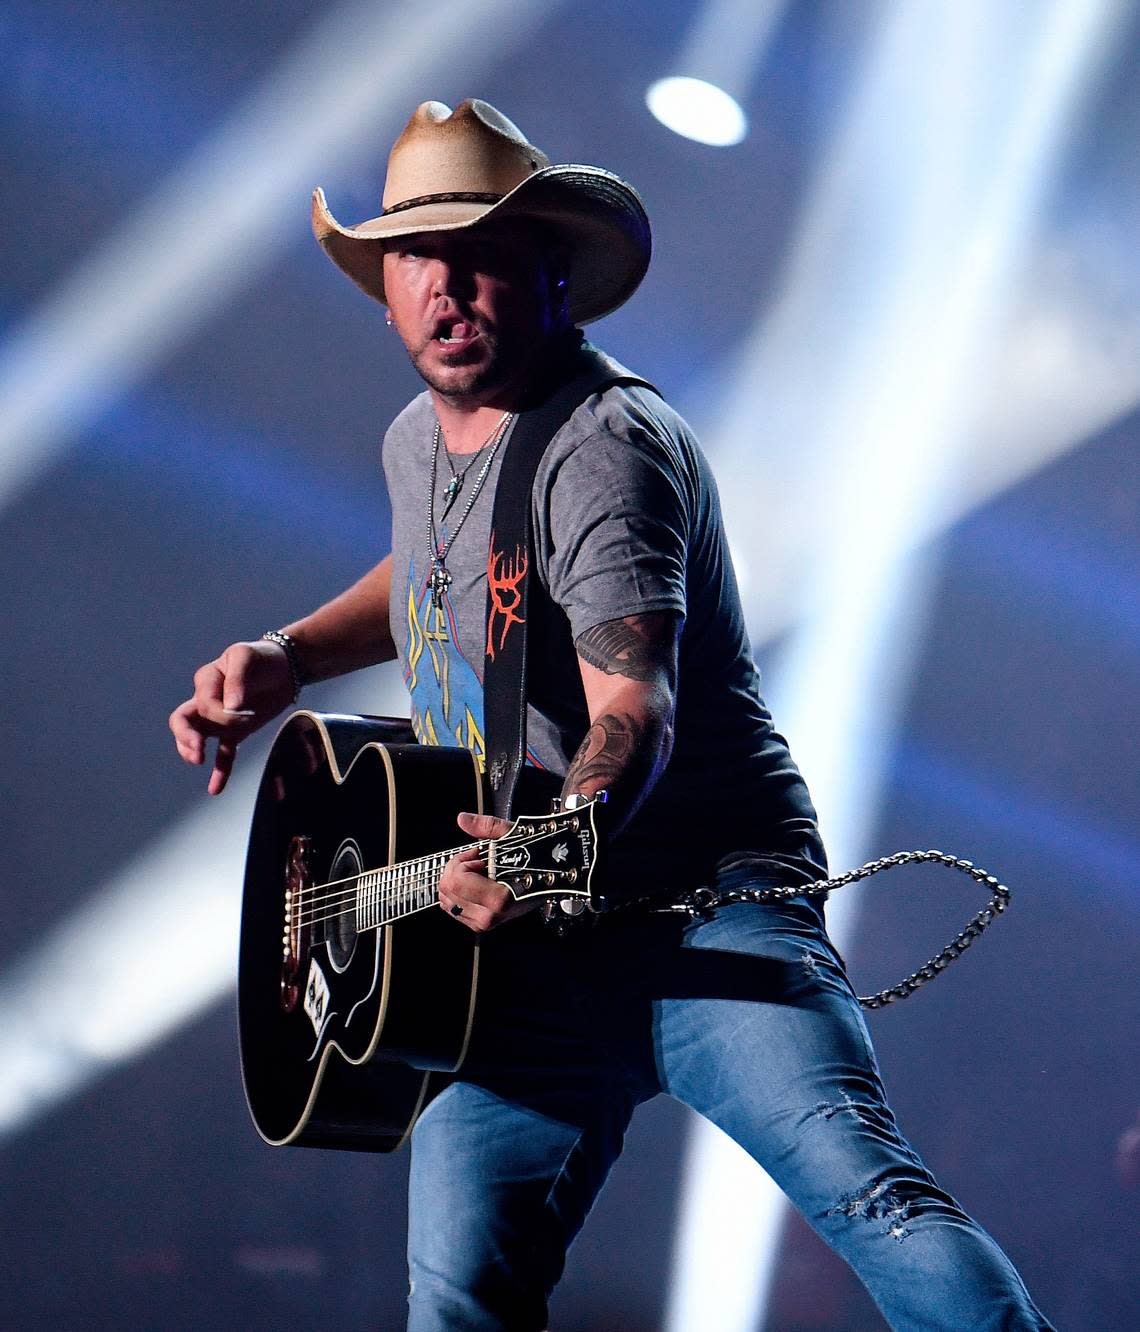 Jason Aldean brings his “Back in the Saddle 2021 Tour’ concert at Raleigh, N.C.’s Coastal Credit Union Music Pavilion at Walnut Creek Thursday night, Aug. 19, 2021 with Hardy and Lainey Wilson.